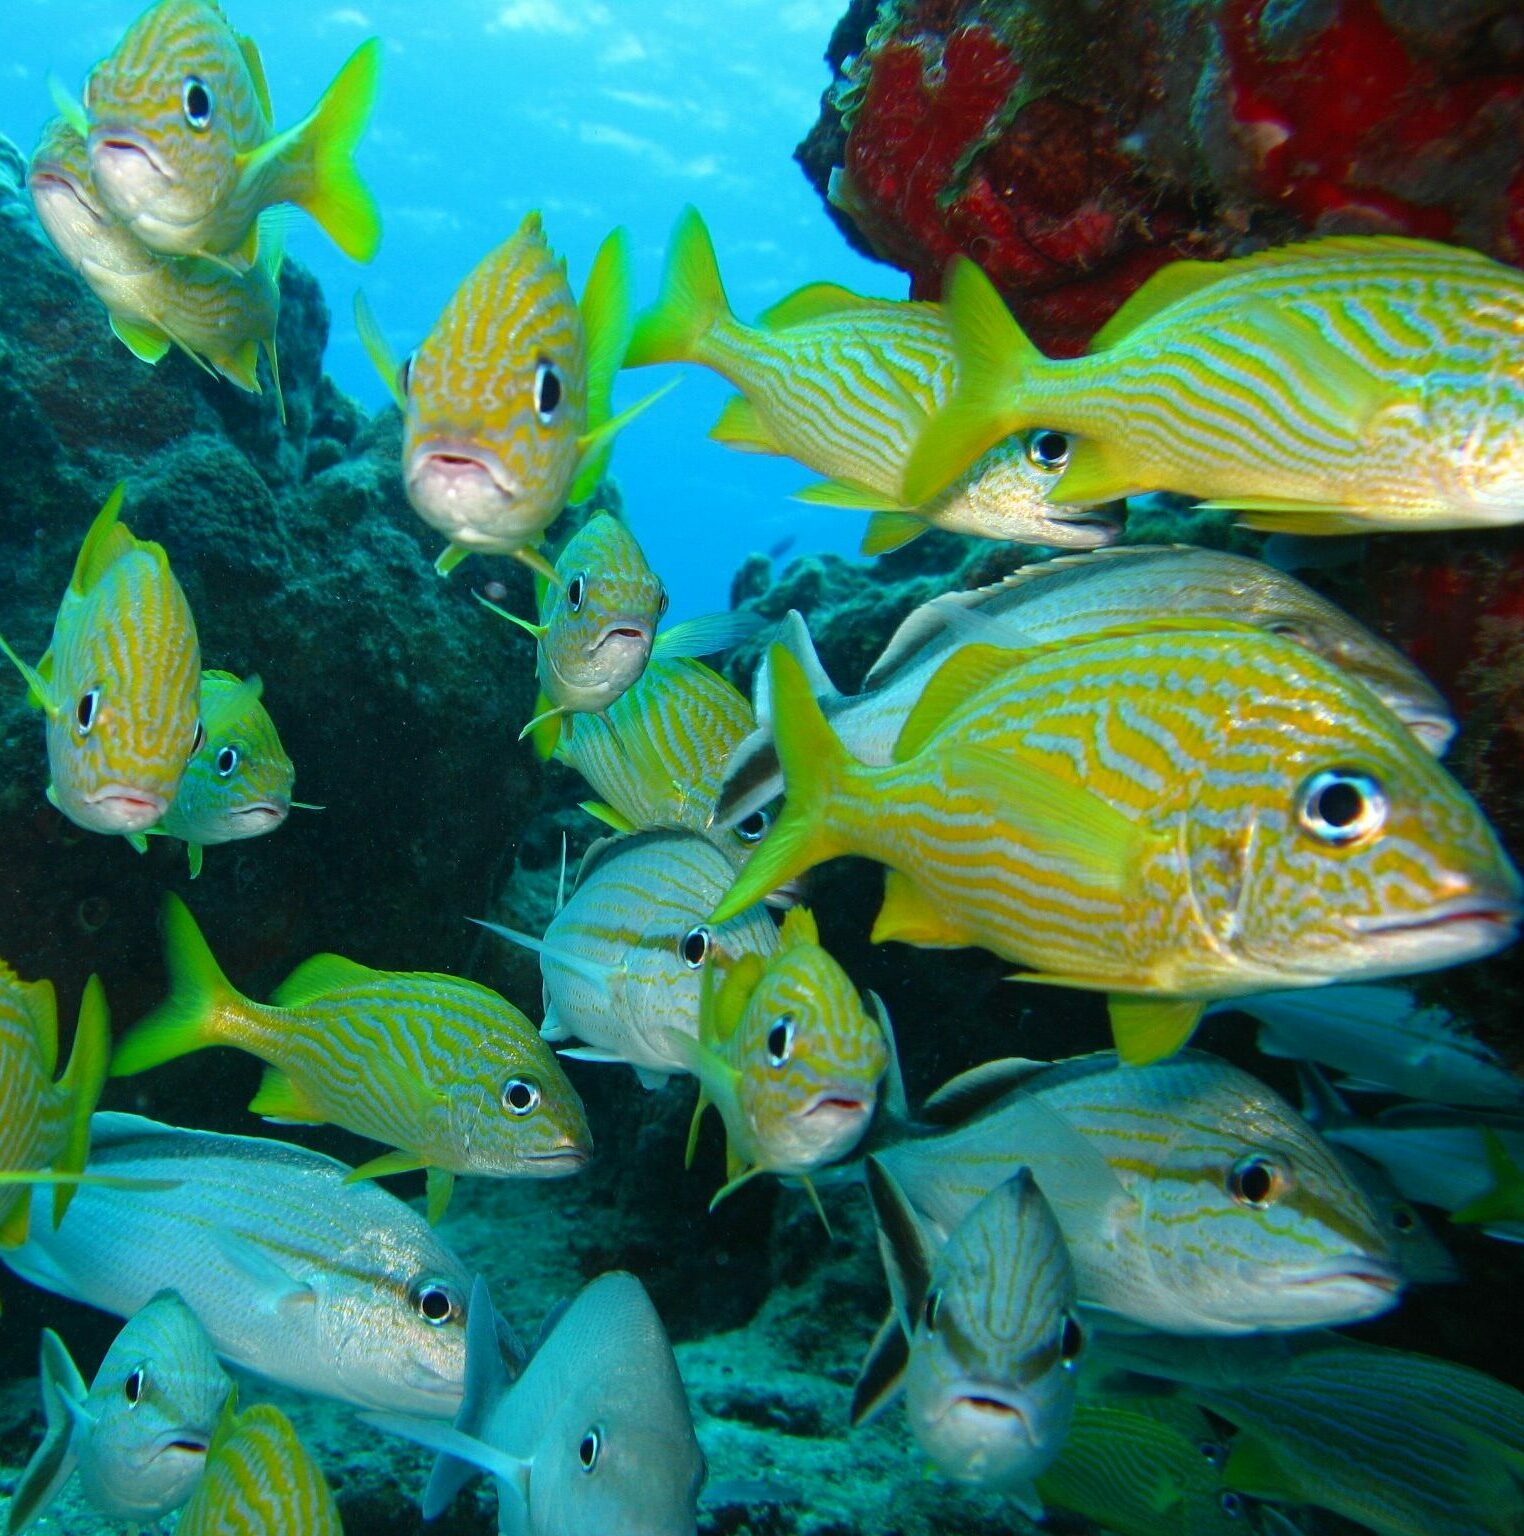 10 ocean events to watch out for at COP15